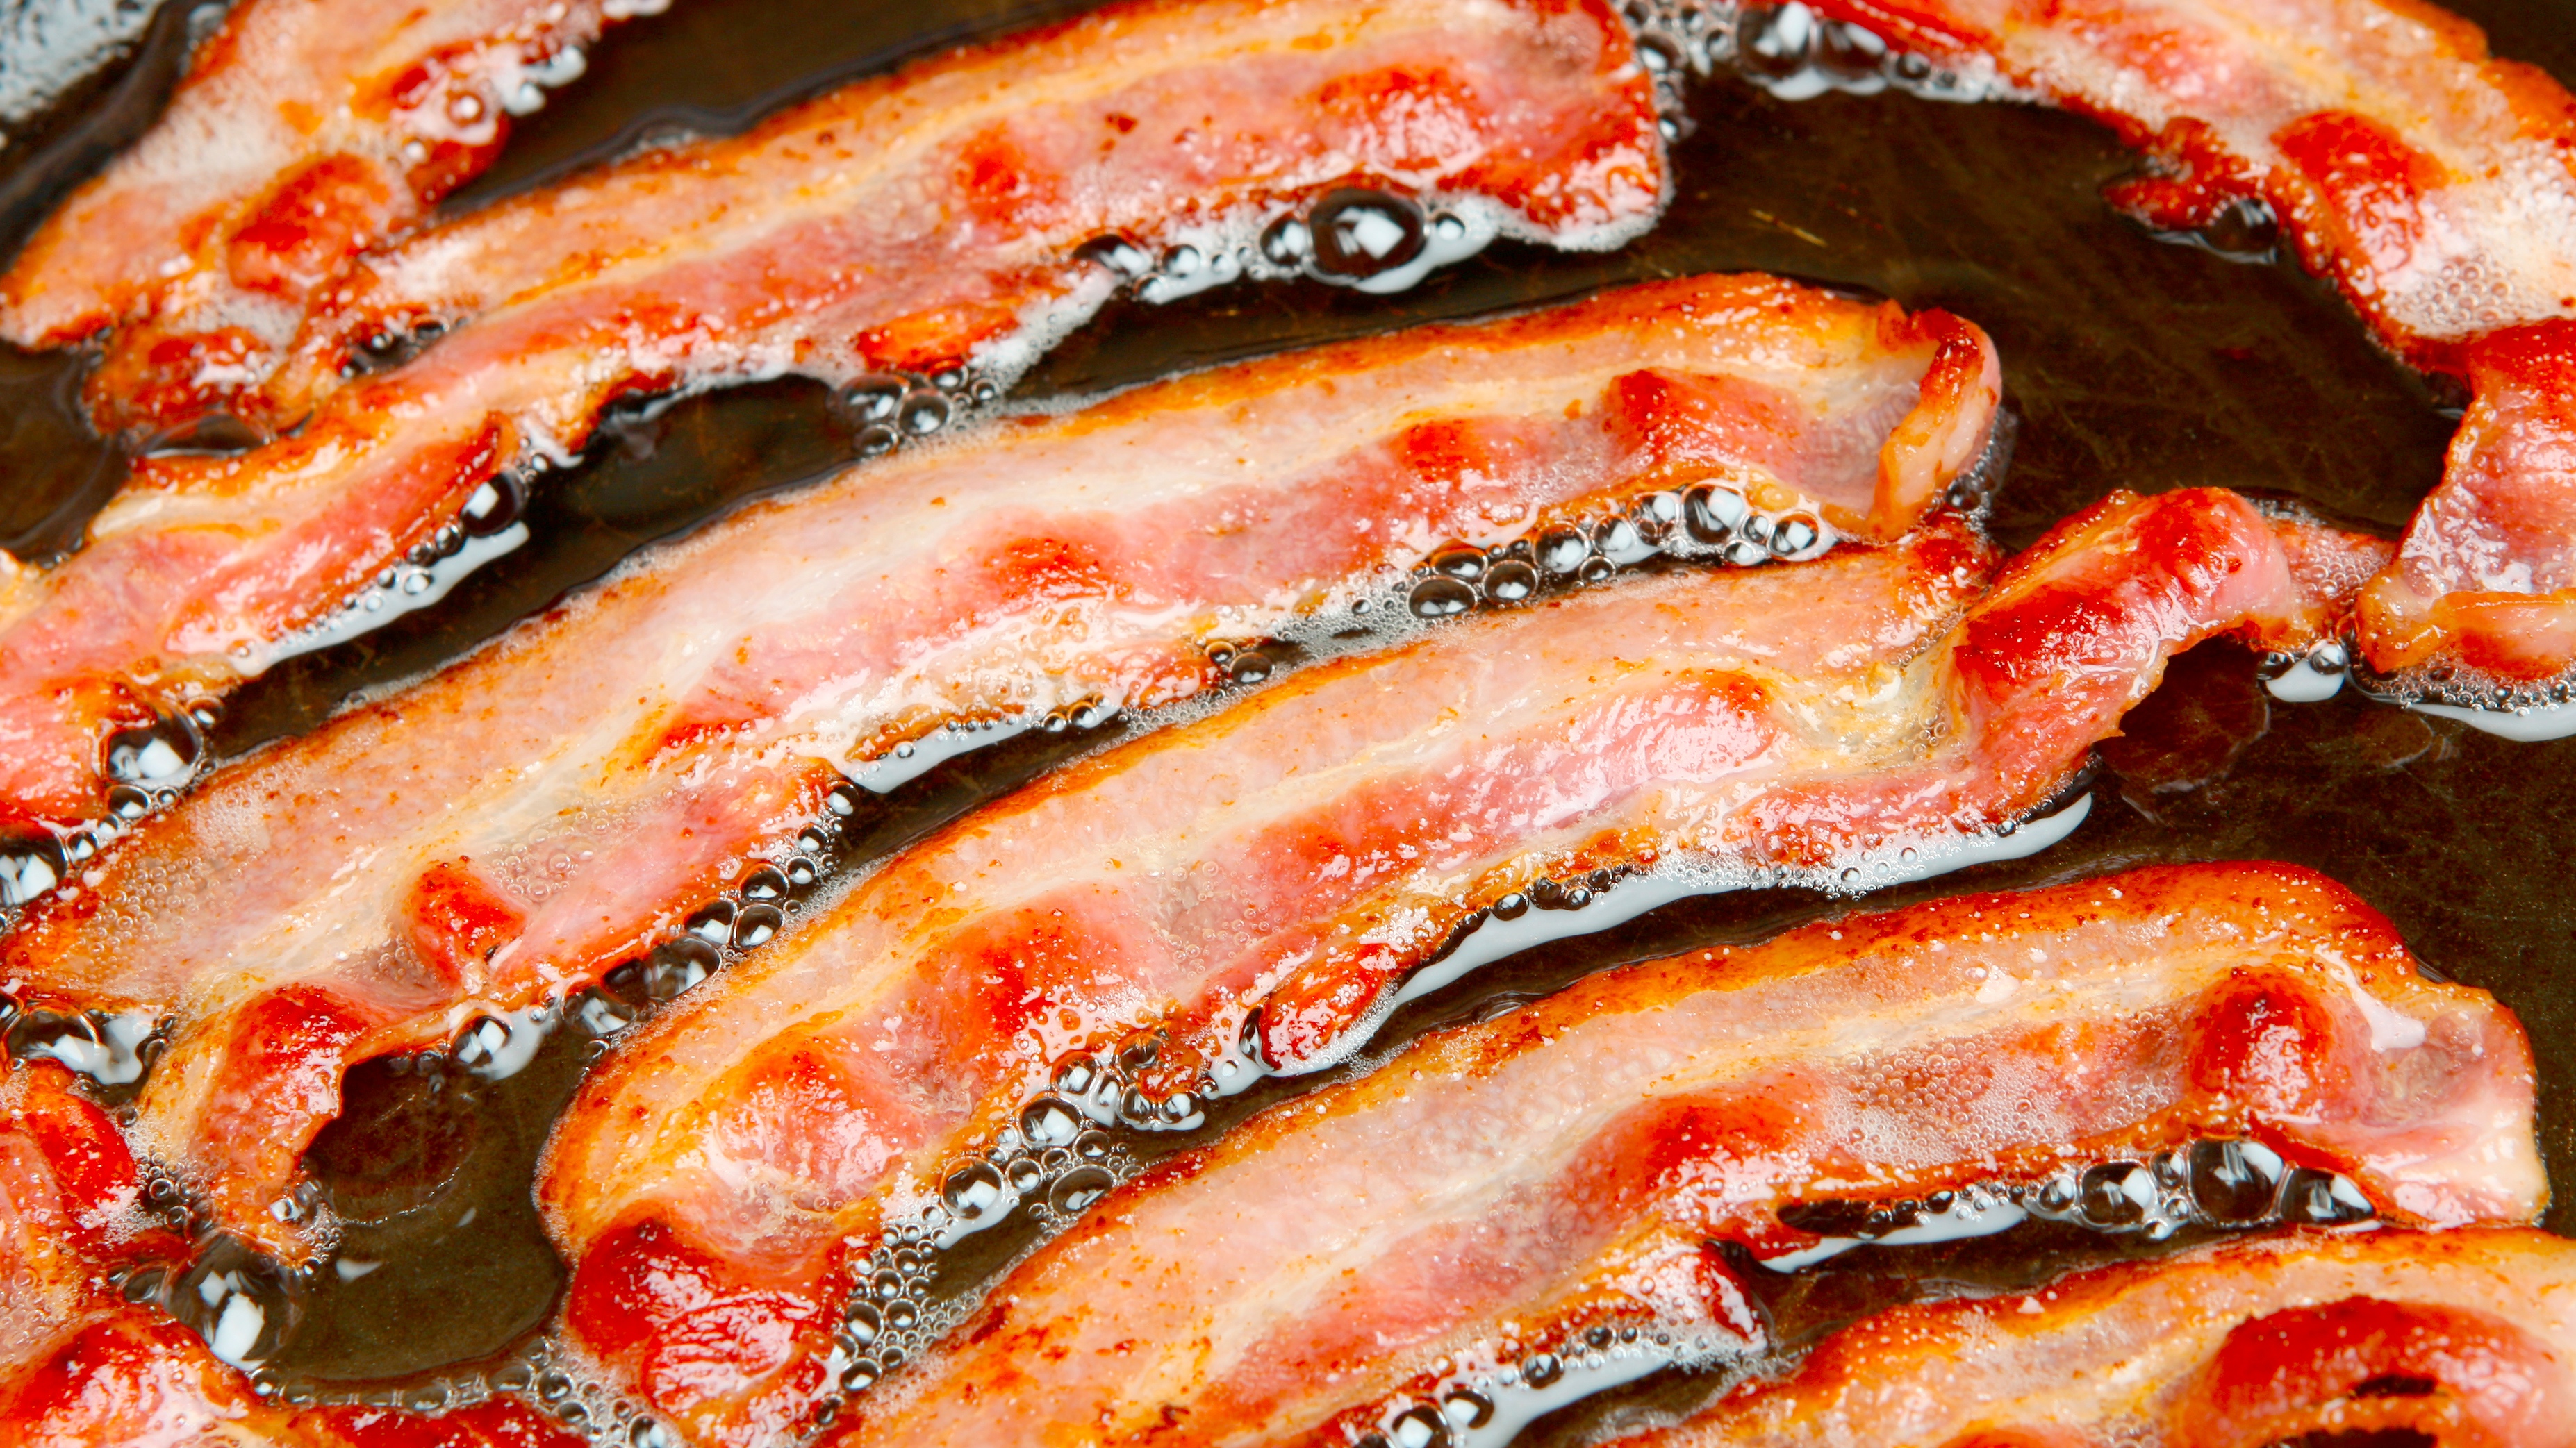 Who invented bacon?